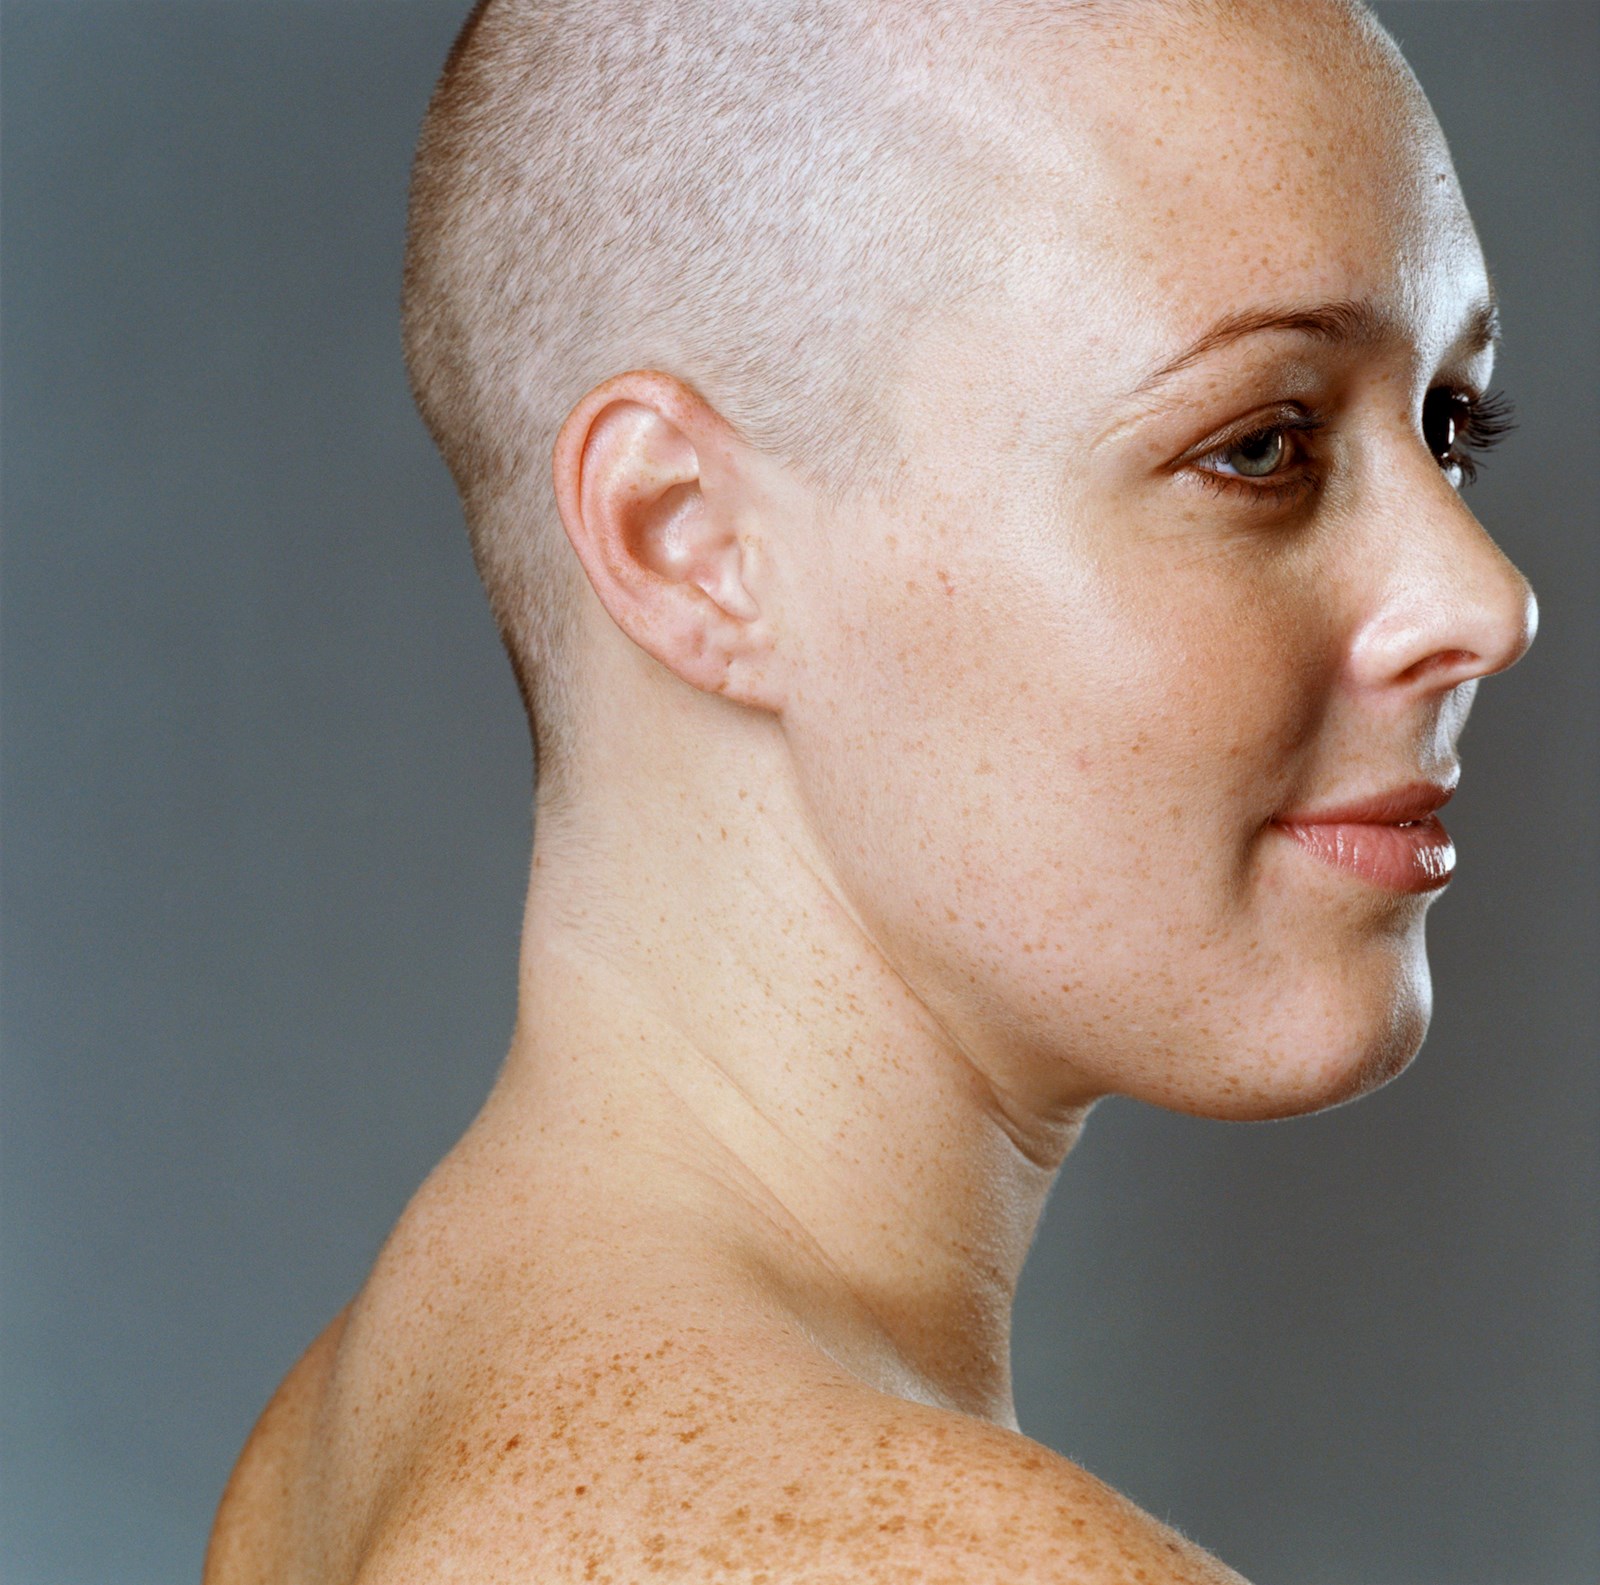 Molly holly shaved bald